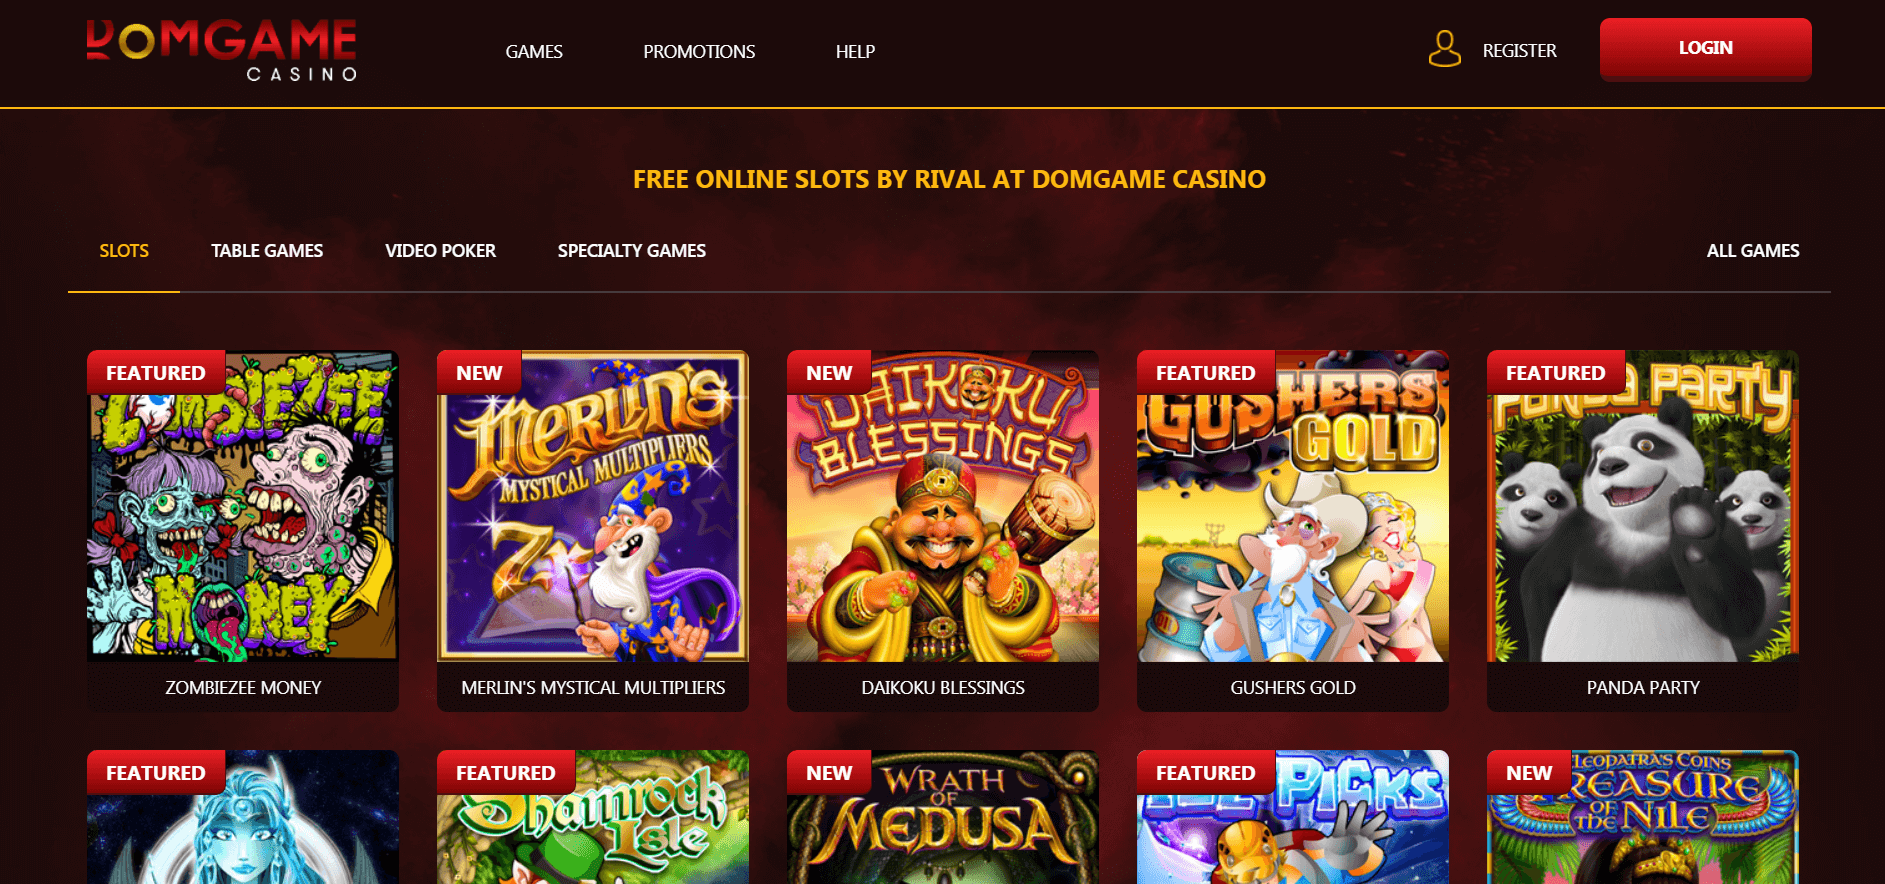 dom game casino review and slots 2021